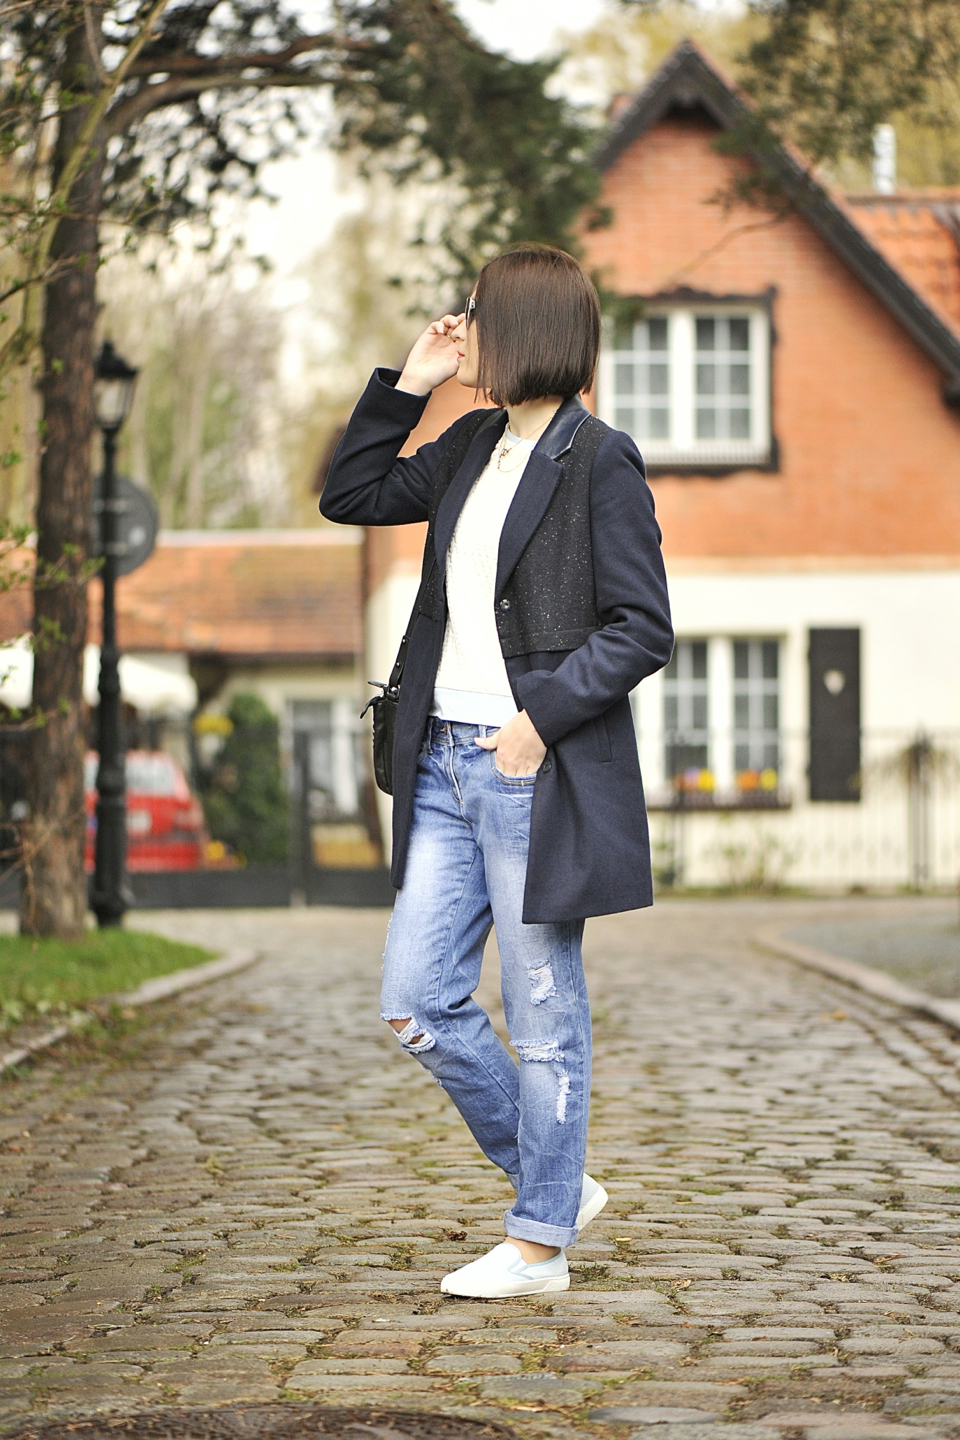 slip-on-shoes-street-style